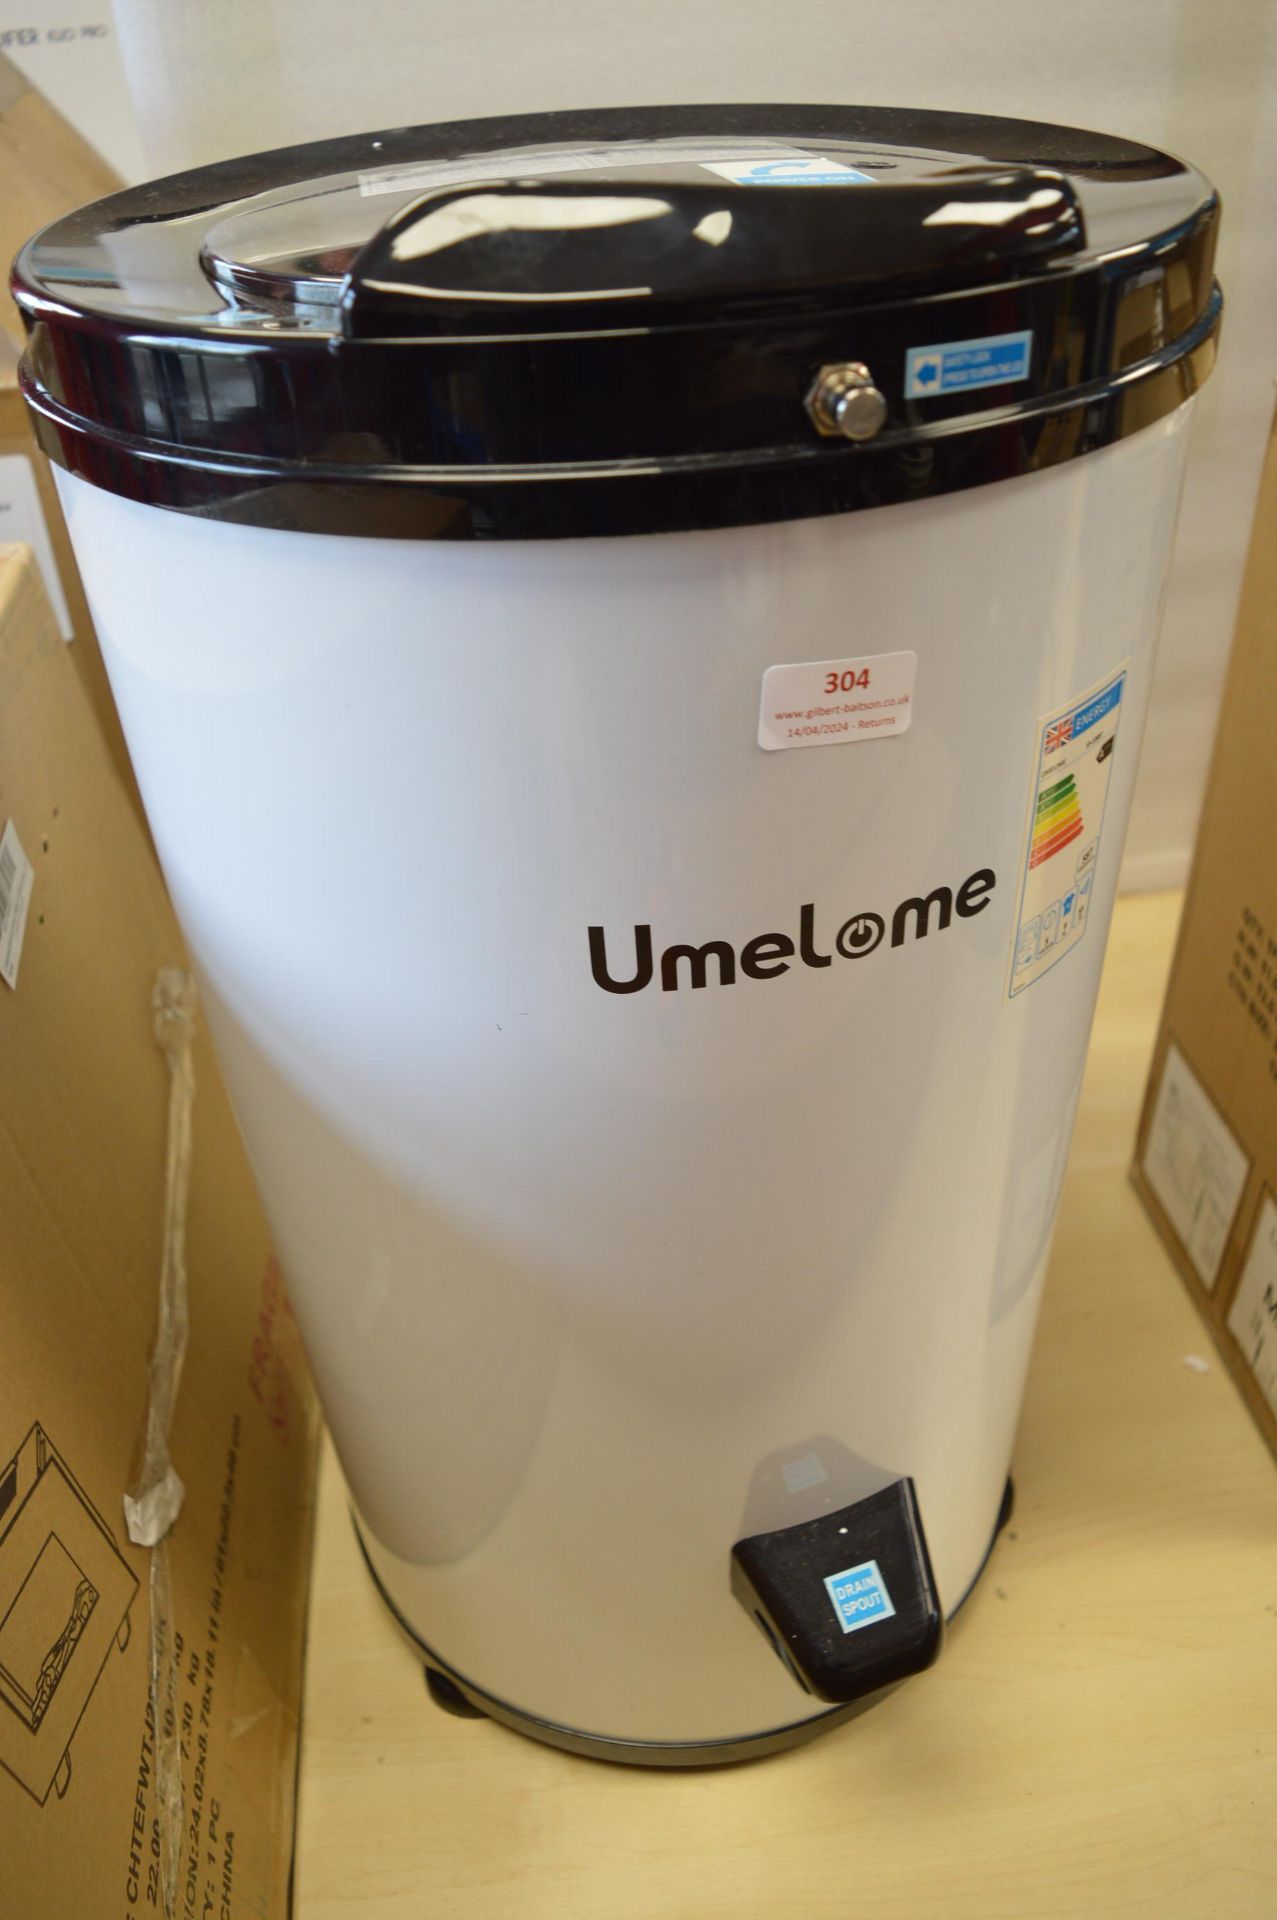 *Umelome Portable Spin Dryer